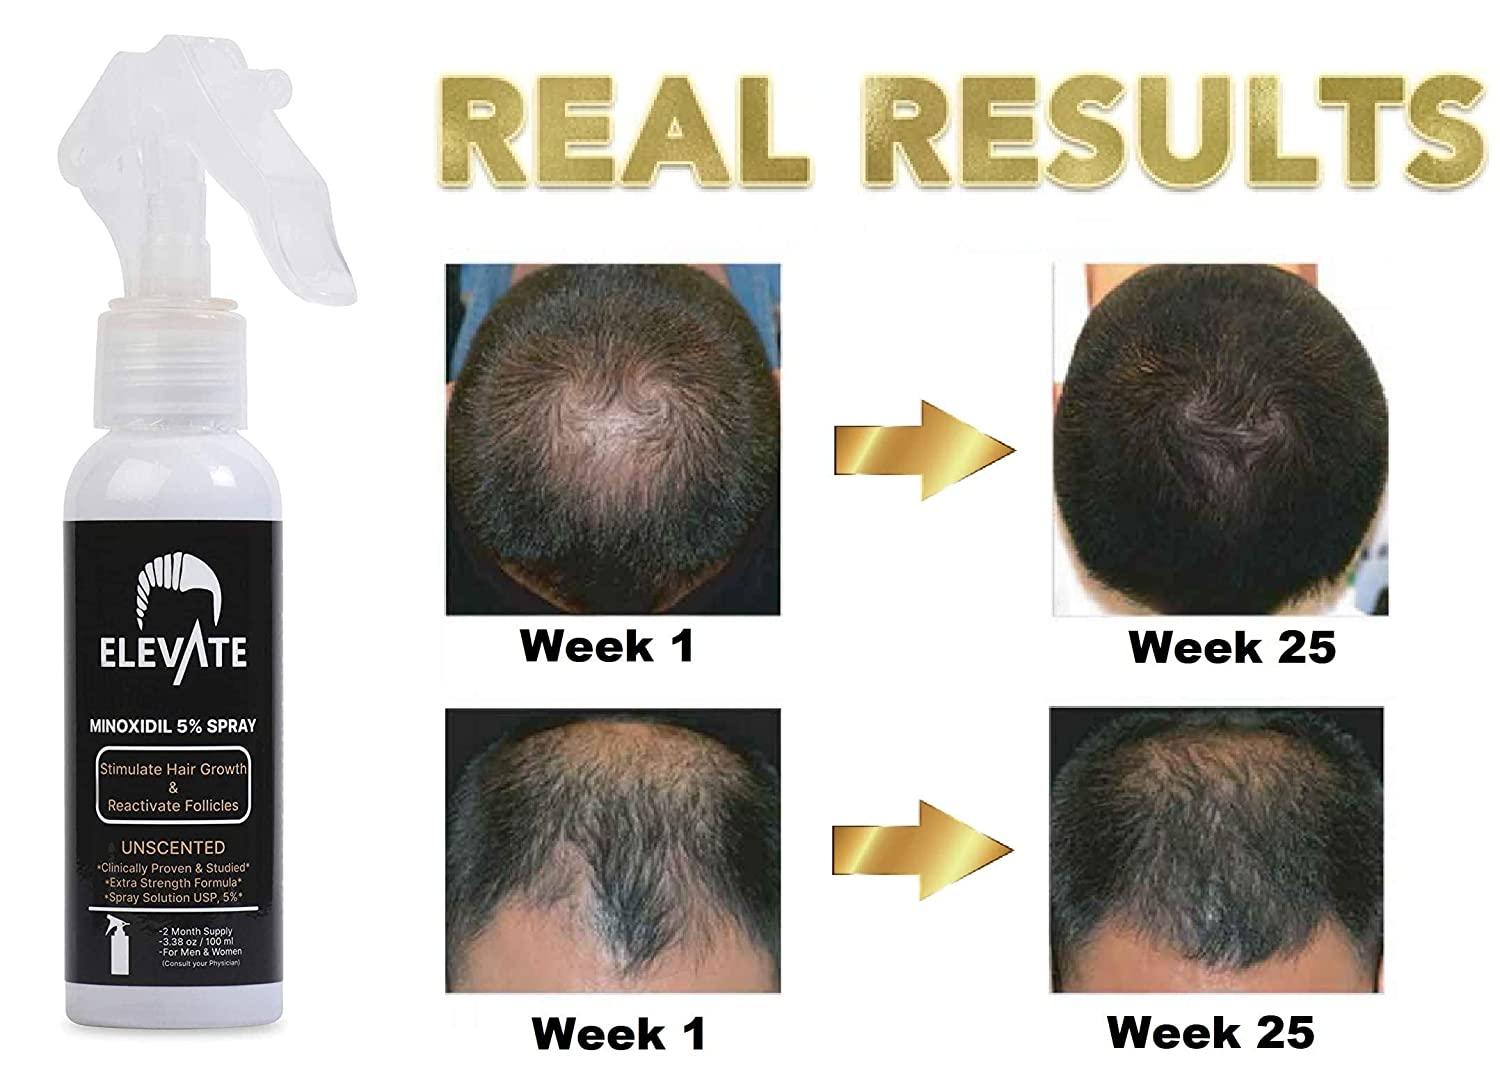 ELEVATE 5% Minoxidil Hair Growth Spray - Extra Strength Professional  Treatment for Hair Loss and Hair Regrowth - Stimulate Hair Follicles for  Men & Women - 1 to 2 Month Supply 100ml  Fl Oz (Pack of 1)